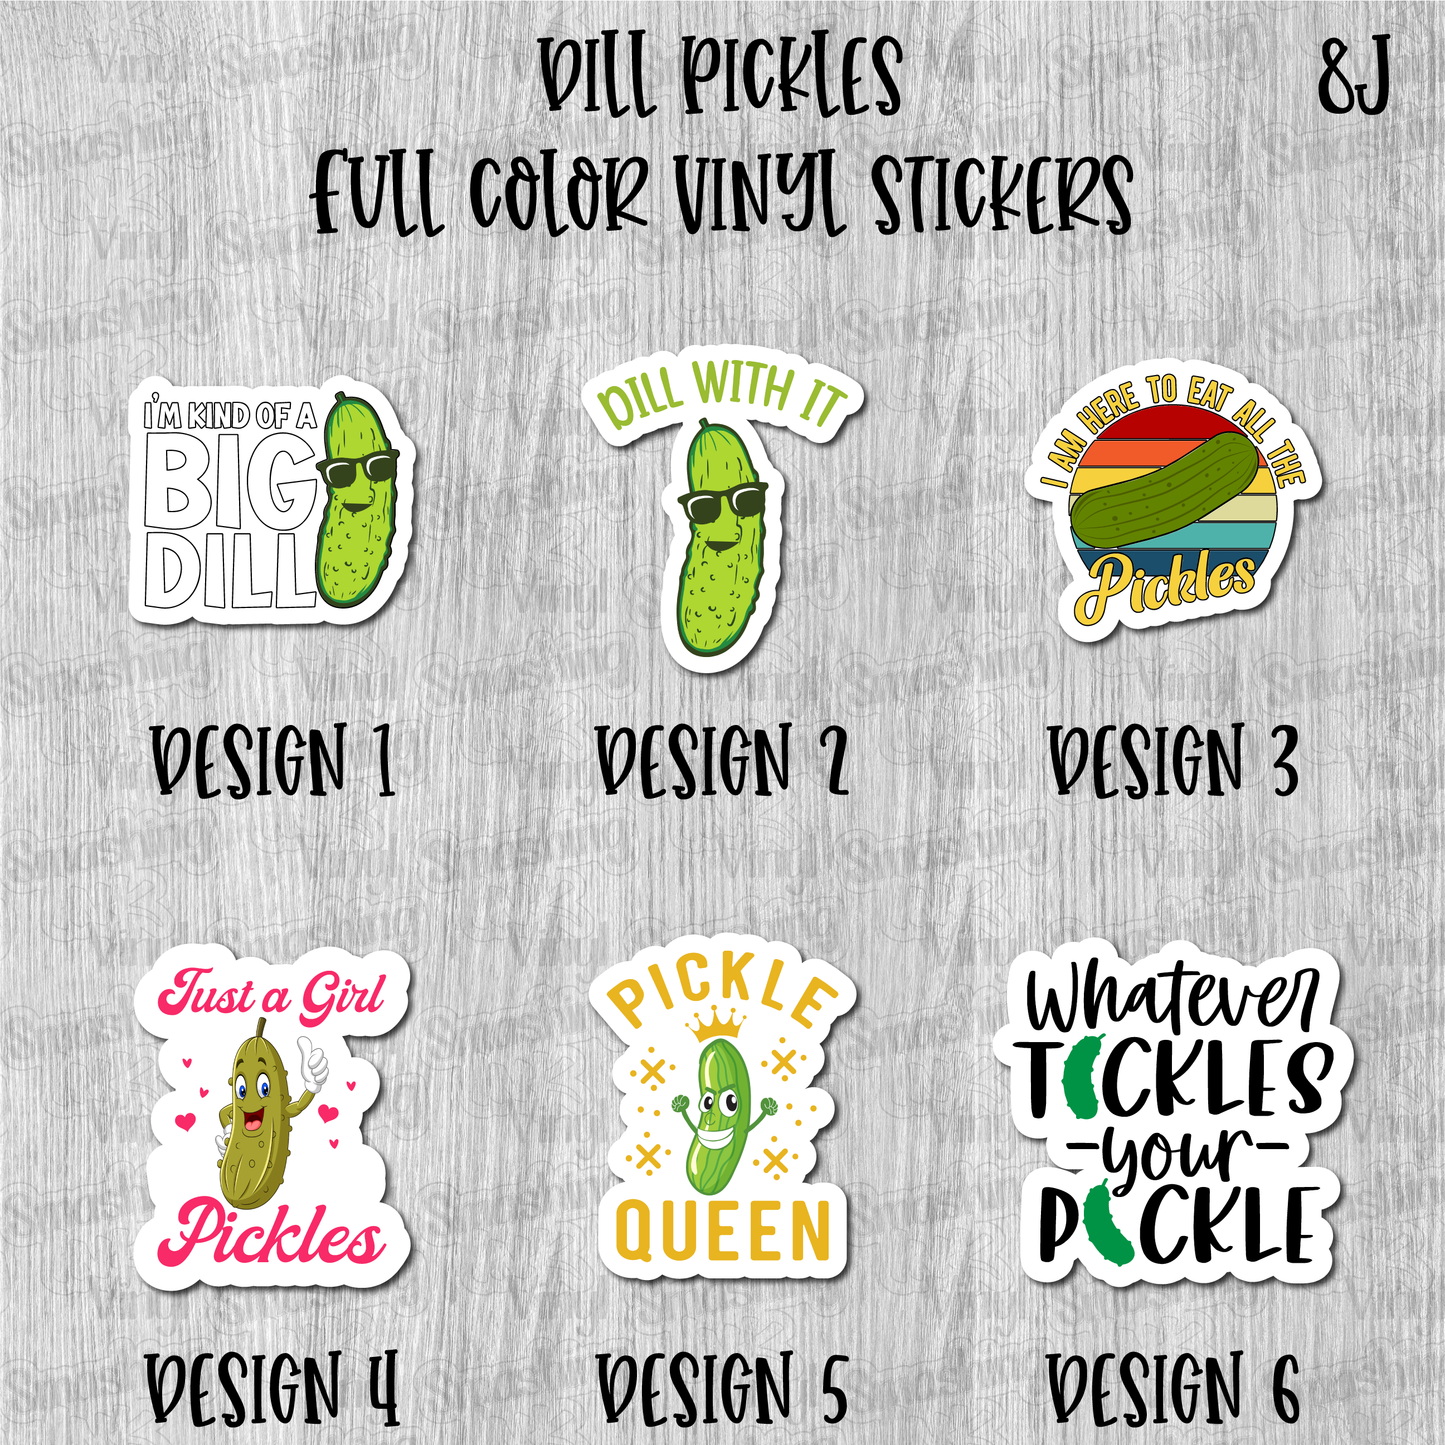 Dill Pickles - Full Color Vinyl Stickers (SHIPS IN 3-7 BUS DAYS)